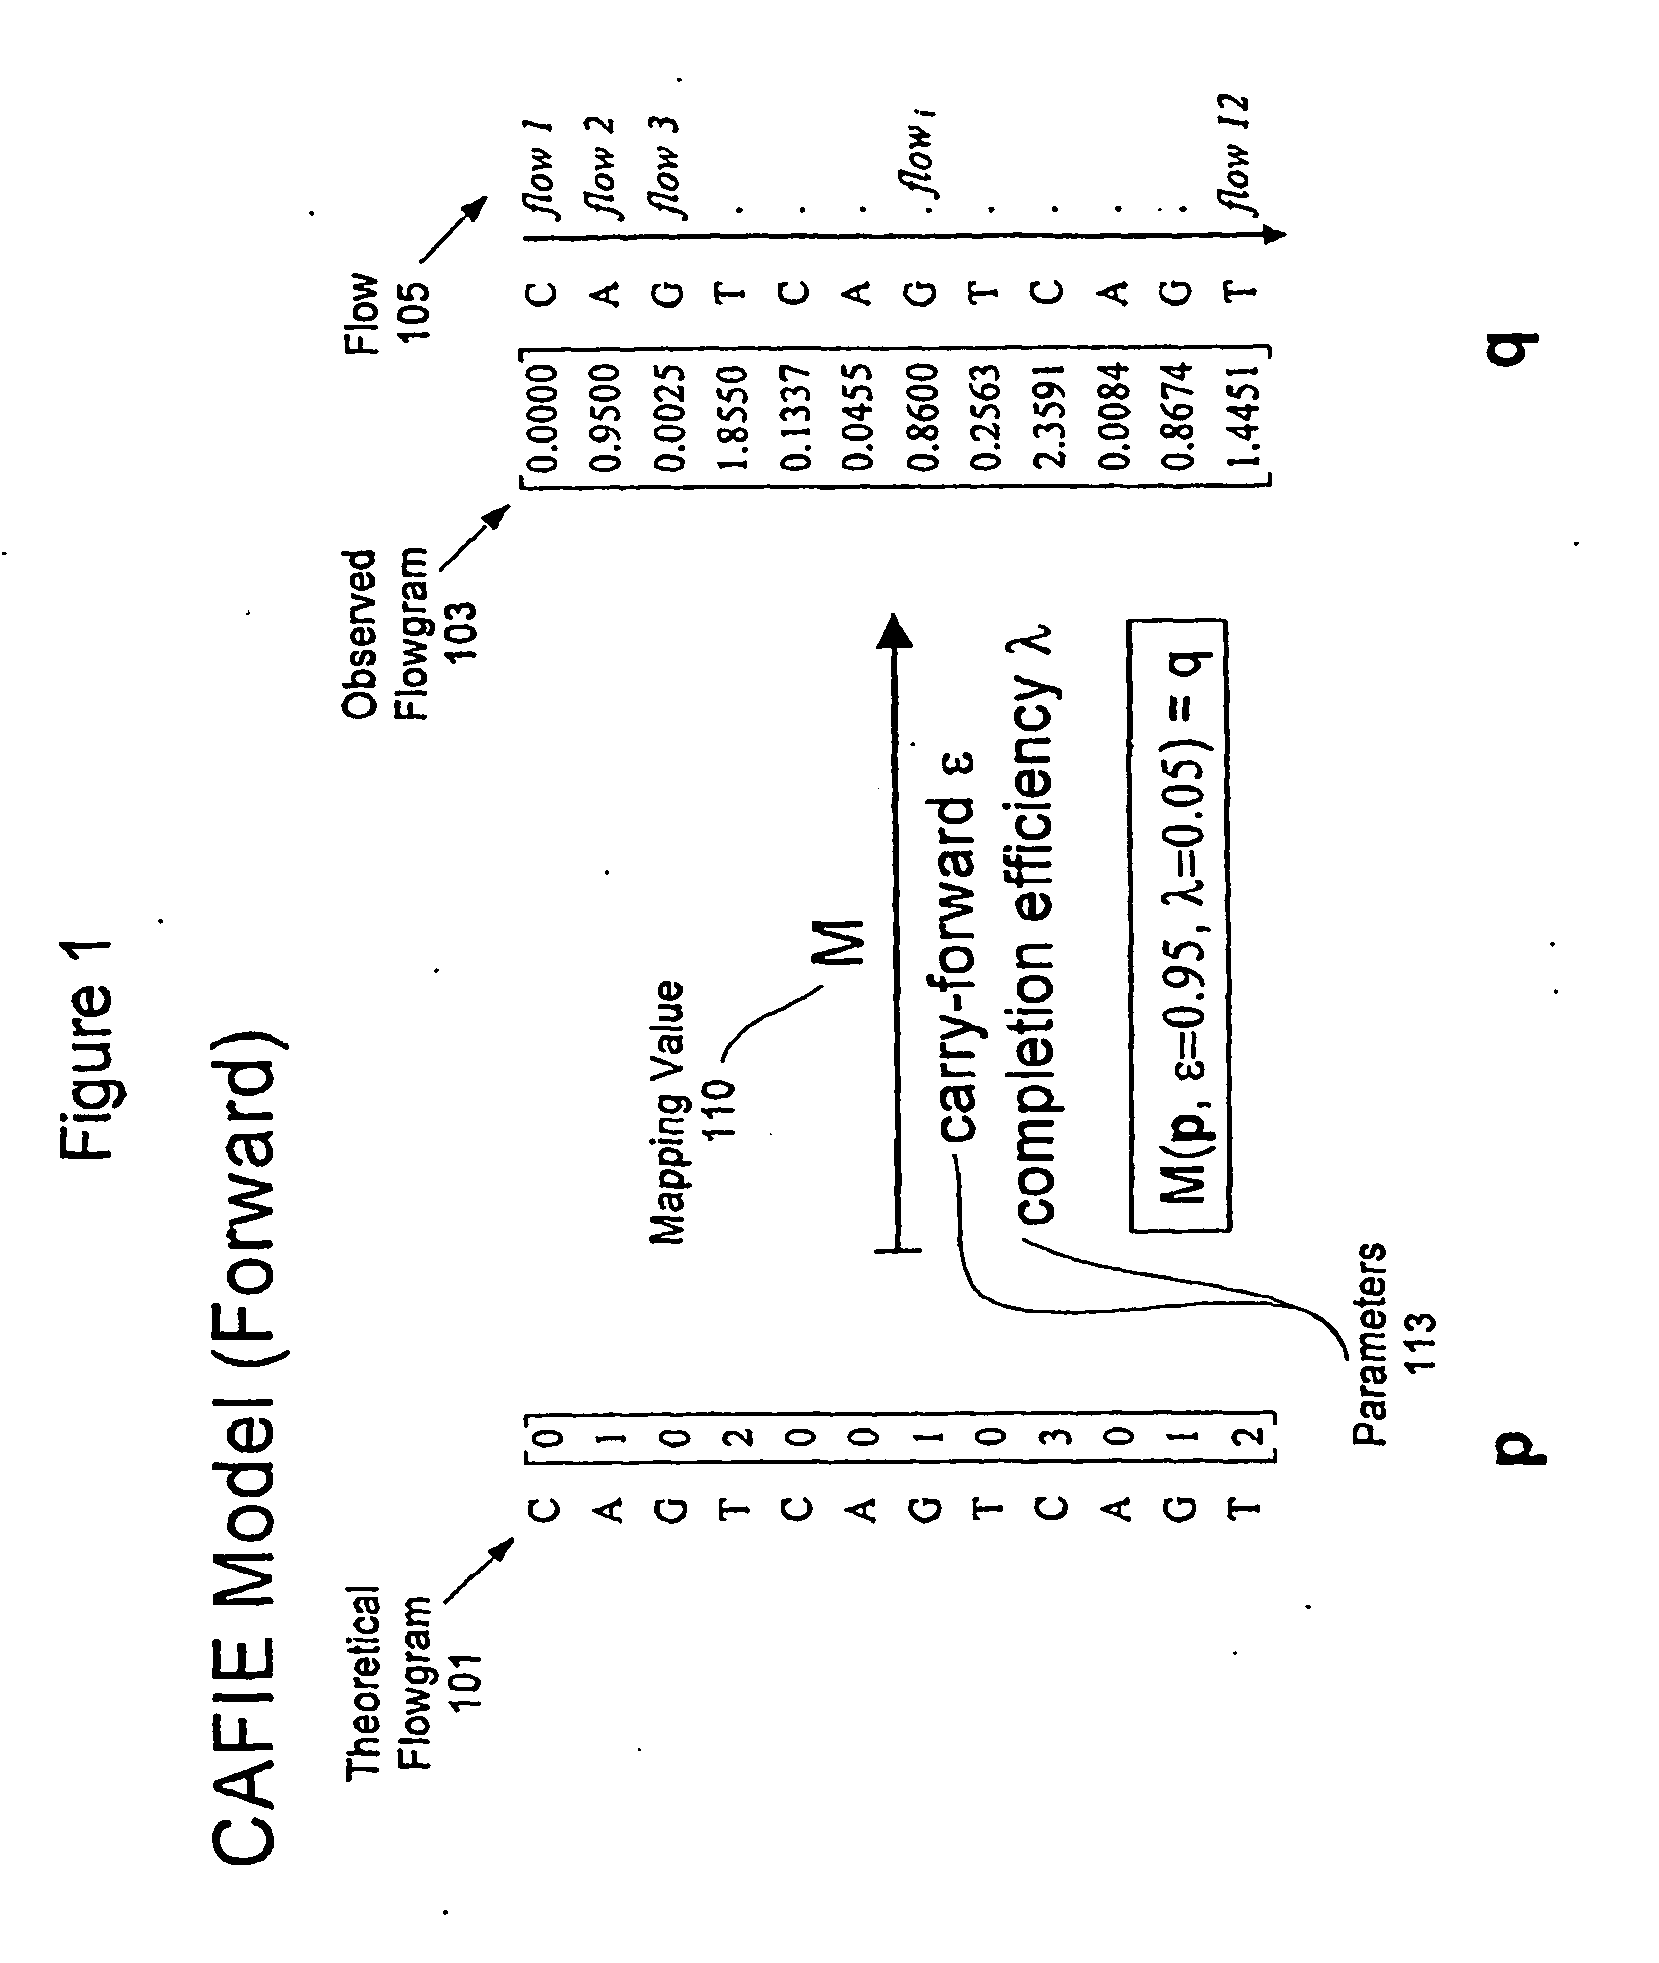 System and Method for Correcting Primer Extension Errors in Nucleic Acid Sequence Data